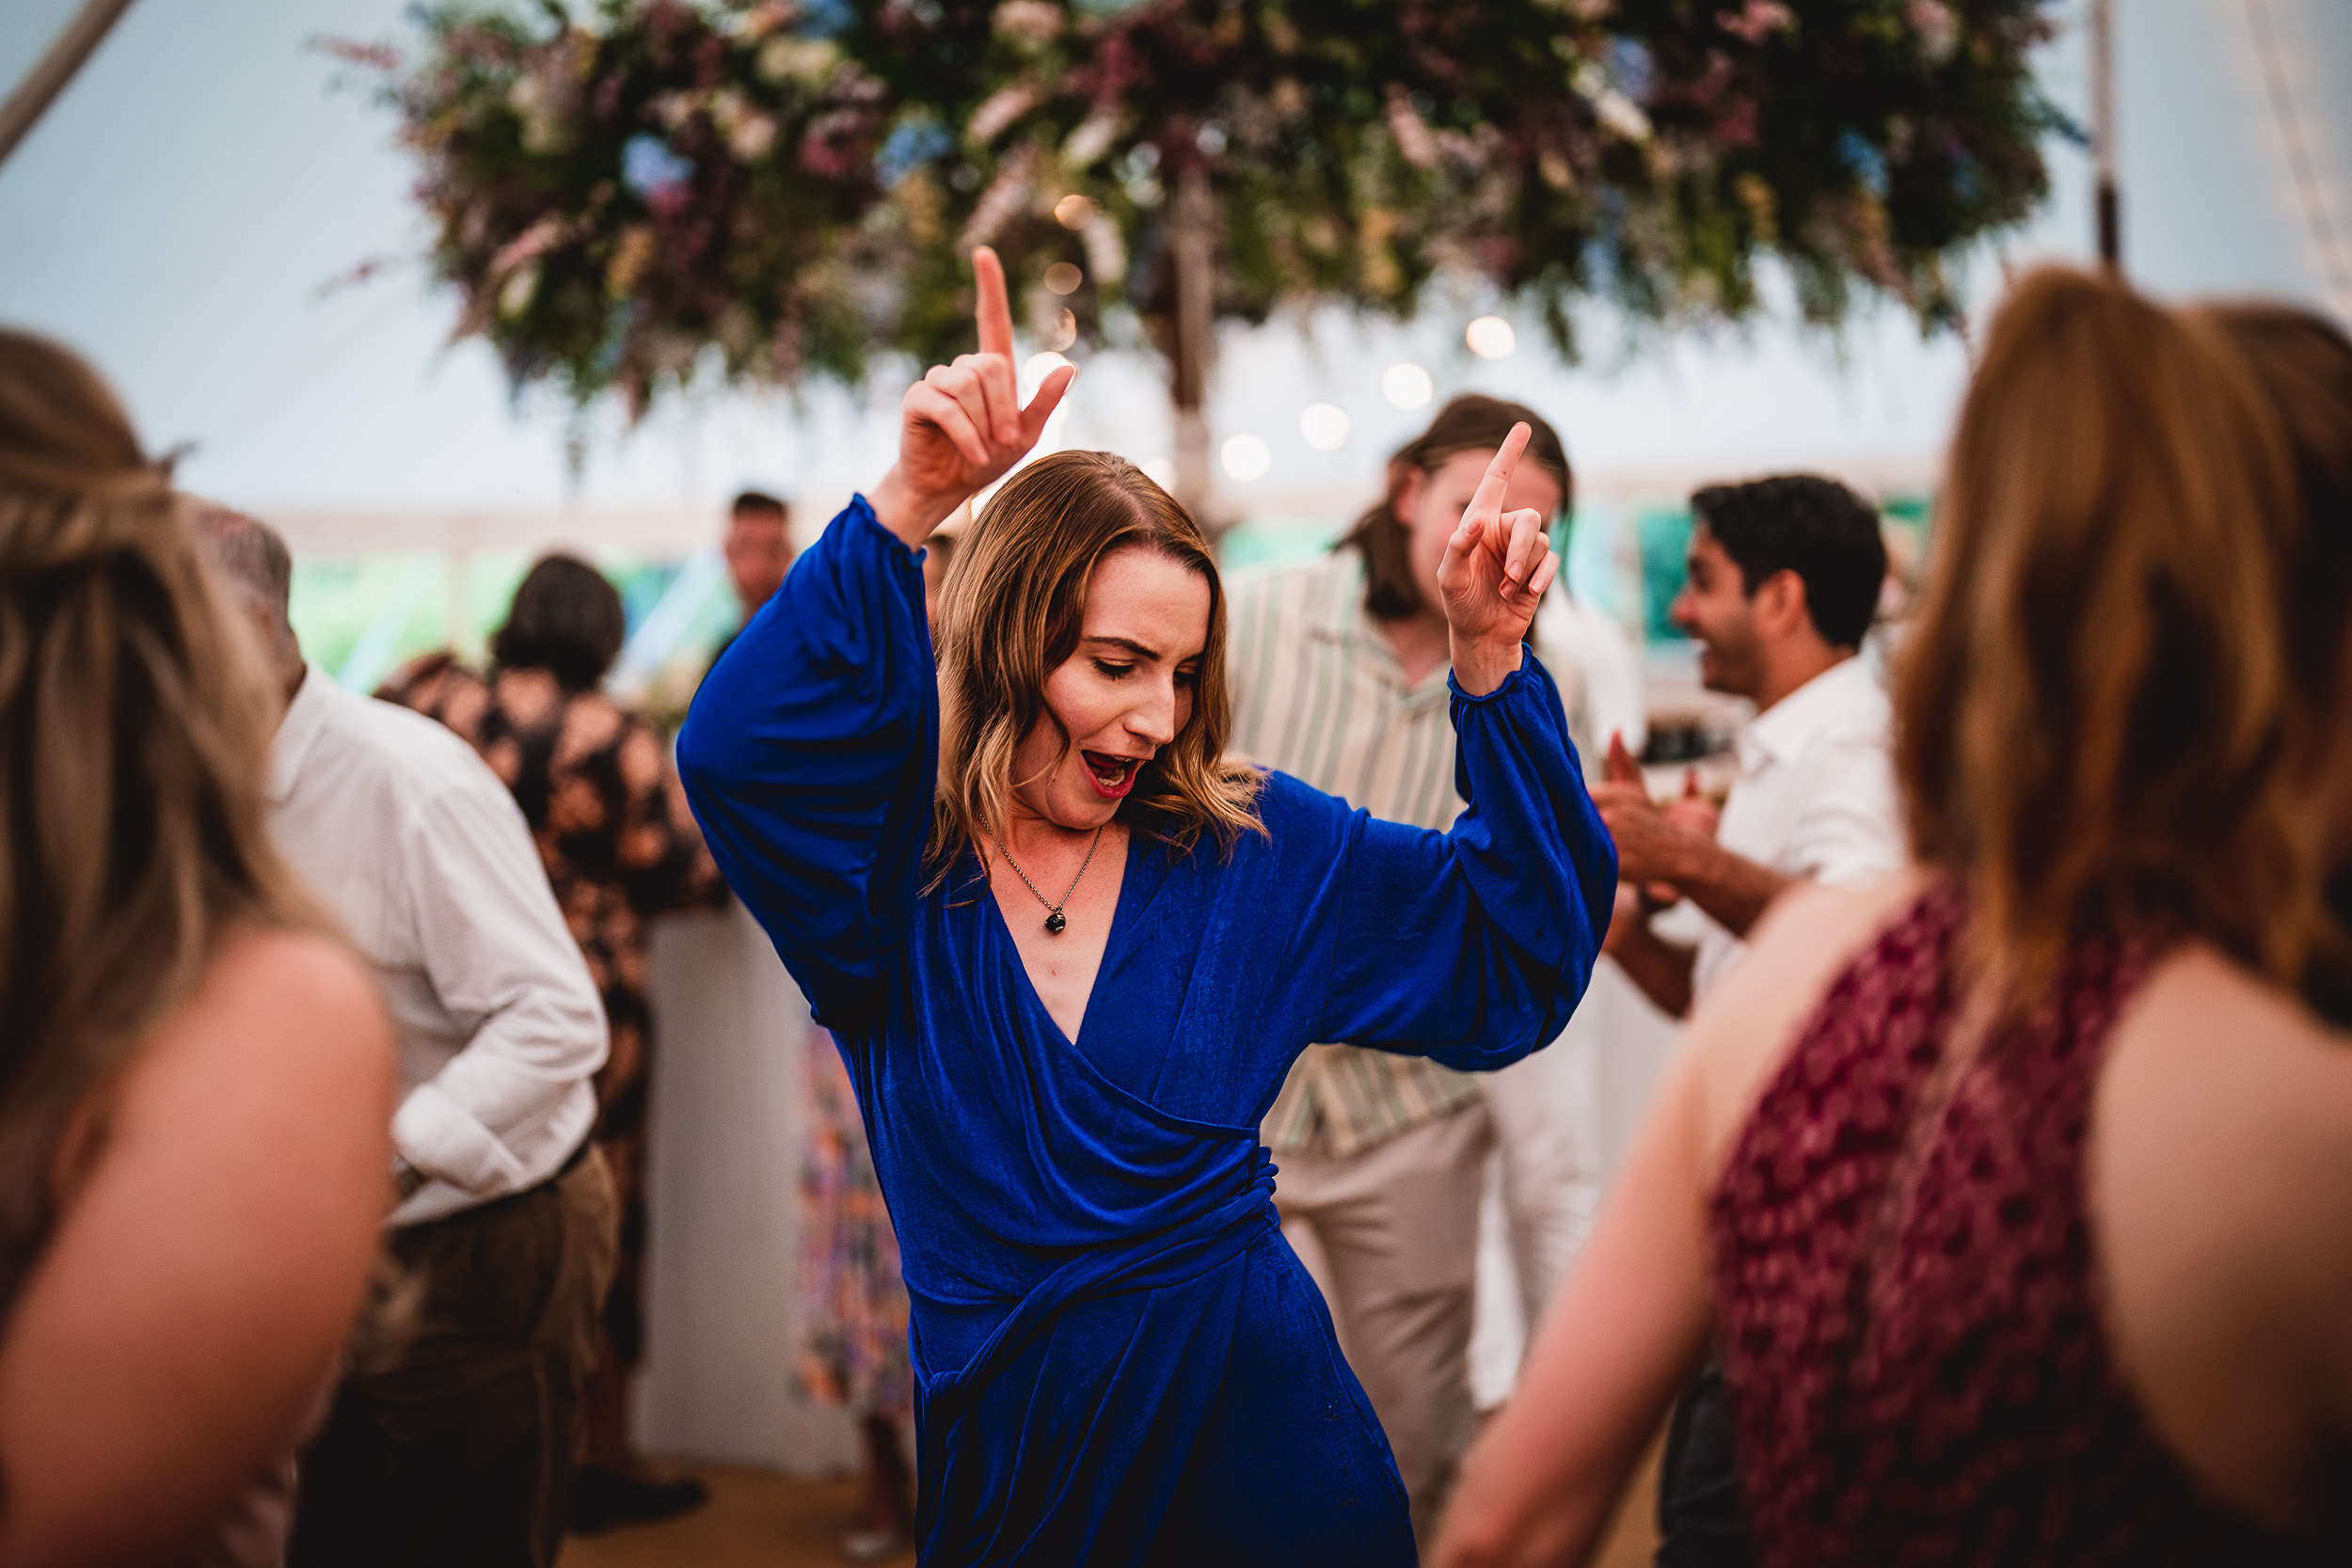 A wedding photographer captures a woman dancing at a wedding in a tent.